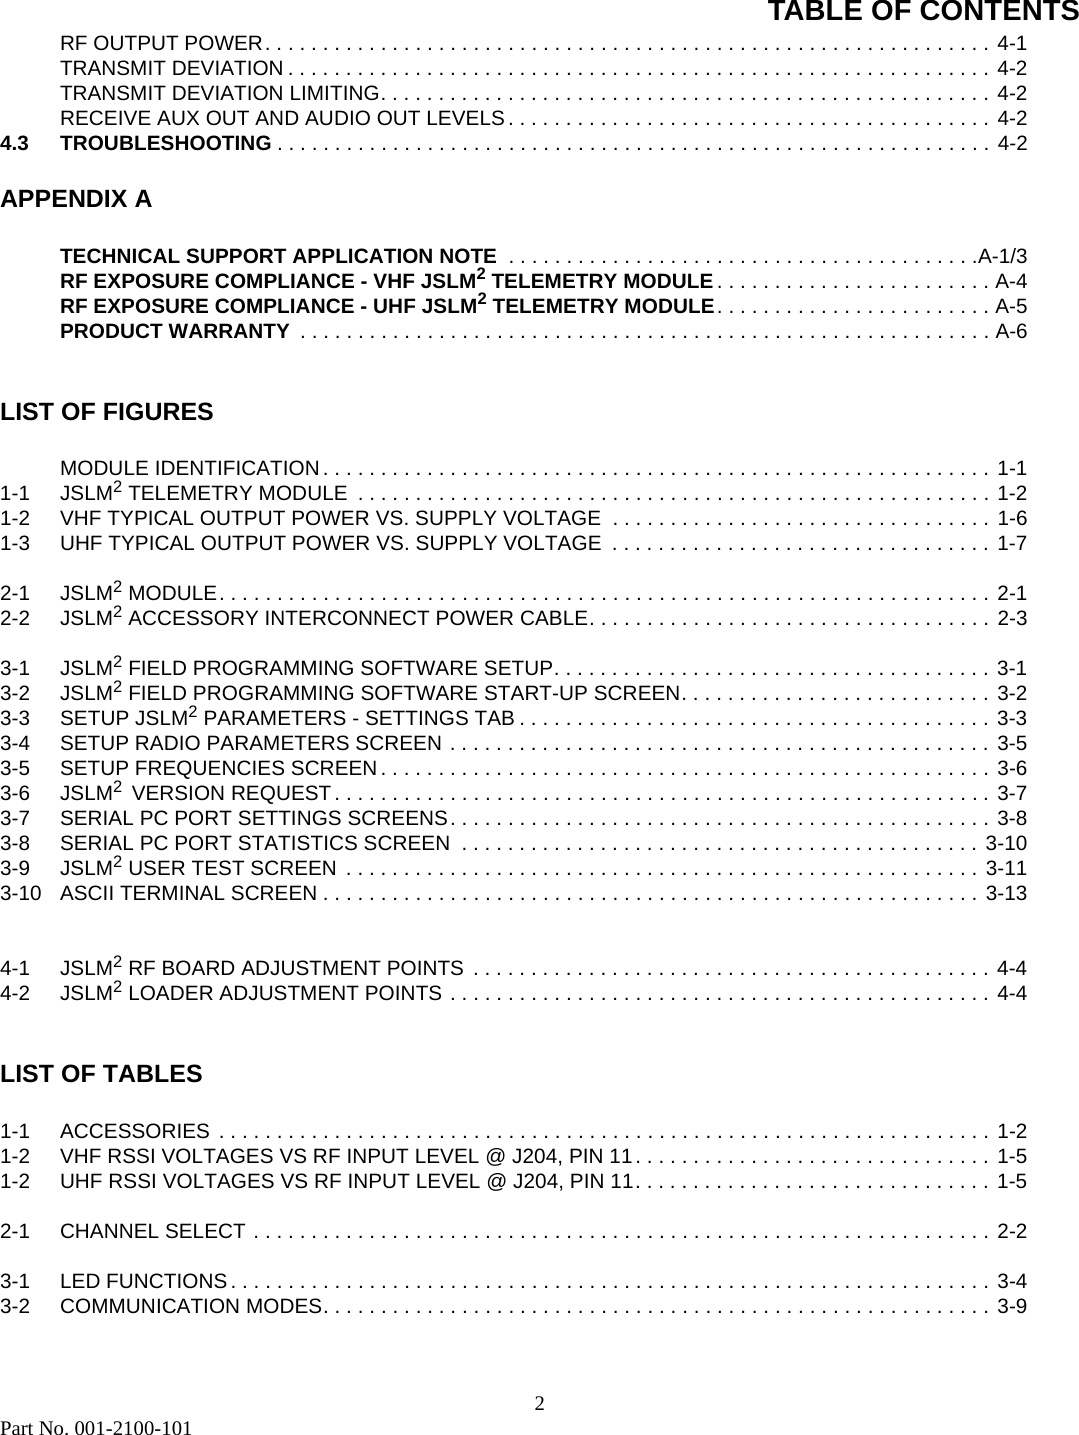 TABLE OF CONTENTS2Part No. 001-2100-101RF OUTPUT POWER. . . . . . . . . . . . . . . . . . . . . . . . . . . . . . . . . . . . . . . . . . . . . . . . . . . . . . . . . . . . . . . 4-1TRANSMIT DEVIATION . . . . . . . . . . . . . . . . . . . . . . . . . . . . . . . . . . . . . . . . . . . . . . . . . . . . . . . . . . . . . 4-2TRANSMIT DEVIATION LIMITING. . . . . . . . . . . . . . . . . . . . . . . . . . . . . . . . . . . . . . . . . . . . . . . . . . . . . 4-2RECEIVE AUX OUT AND AUDIO OUT LEVELS . . . . . . . . . . . . . . . . . . . . . . . . . . . . . . . . . . . . . . . . . . 4-24.3 TROUBLESHOOTING . . . . . . . . . . . . . . . . . . . . . . . . . . . . . . . . . . . . . . . . . . . . . . . . . . . . . . . . . . . . . . 4-2APPENDIX ATECHNICAL SUPPORT APPLICATION NOTE  . . . . . . . . . . . . . . . . . . . . . . . . . . . . . . . . . . . . . . . . .A-1/3RF EXPOSURE COMPLIANCE - VHF JSLM2 TELEMETRY MODULE. . . . . . . . . . . . . . . . . . . . . . . . A-4RF EXPOSURE COMPLIANCE - UHF JSLM2 TELEMETRY MODULE. . . . . . . . . . . . . . . . . . . . . . . . A-5PRODUCT WARRANTY  . . . . . . . . . . . . . . . . . . . . . . . . . . . . . . . . . . . . . . . . . . . . . . . . . . . . . . . . . . . . A-6LIST OF FIGURESMODULE IDENTIFICATION . . . . . . . . . . . . . . . . . . . . . . . . . . . . . . . . . . . . . . . . . . . . . . . . . . . . . . . . . . 1-11-1 JSLM2 TELEMETRY MODULE  . . . . . . . . . . . . . . . . . . . . . . . . . . . . . . . . . . . . . . . . . . . . . . . . . . . . . . . 1-21-2 VHF TYPICAL OUTPUT POWER VS. SUPPLY VOLTAGE  . . . . . . . . . . . . . . . . . . . . . . . . . . . . . . . . . 1-61-3 UHF TYPICAL OUTPUT POWER VS. SUPPLY VOLTAGE  . . . . . . . . . . . . . . . . . . . . . . . . . . . . . . . . . 1-72-1 JSLM2 MODULE. . . . . . . . . . . . . . . . . . . . . . . . . . . . . . . . . . . . . . . . . . . . . . . . . . . . . . . . . . . . . . . . . . . 2-12-2 JSLM2 ACCESSORY INTERCONNECT POWER CABLE. . . . . . . . . . . . . . . . . . . . . . . . . . . . . . . . . . .  2-33-1 JSLM2 FIELD PROGRAMMING SOFTWARE SETUP. . . . . . . . . . . . . . . . . . . . . . . . . . . . . . . . . . . . . . 3-13-2 JSLM2 FIELD PROGRAMMING SOFTWARE START-UP SCREEN. . . . . . . . . . . . . . . . . . . . . . . . . . . 3-23-3 SETUP JSLM2 PARAMETERS - SETTINGS TAB . . . . . . . . . . . . . . . . . . . . . . . . . . . . . . . . . . . . . . . . . 3-33-4 SETUP RADIO PARAMETERS SCREEN . . . . . . . . . . . . . . . . . . . . . . . . . . . . . . . . . . . . . . . . . . . . . . . 3-53-5 SETUP FREQUENCIES SCREEN . . . . . . . . . . . . . . . . . . . . . . . . . . . . . . . . . . . . . . . . . . . . . . . . . . . . . 3-63-6 JSLM2  VERSION REQUEST . . . . . . . . . . . . . . . . . . . . . . . . . . . . . . . . . . . . . . . . . . . . . . . . . . . . . . . . . 3-73-7 SERIAL PC PORT SETTINGS SCREENS. . . . . . . . . . . . . . . . . . . . . . . . . . . . . . . . . . . . . . . . . . . . . . . 3-83-8 SERIAL PC PORT STATISTICS SCREEN  . . . . . . . . . . . . . . . . . . . . . . . . . . . . . . . . . . . . . . . . . . . . . 3-103-9 JSLM2 USER TEST SCREEN  . . . . . . . . . . . . . . . . . . . . . . . . . . . . . . . . . . . . . . . . . . . . . . . . . . . . . . . 3-113-10 ASCII TERMINAL SCREEN . . . . . . . . . . . . . . . . . . . . . . . . . . . . . . . . . . . . . . . . . . . . . . . . . . . . . . . . . 3-134-1 JSLM2 RF BOARD ADJUSTMENT POINTS  . . . . . . . . . . . . . . . . . . . . . . . . . . . . . . . . . . . . . . . . . . . . . 4-44-2 JSLM2 LOADER ADJUSTMENT POINTS . . . . . . . . . . . . . . . . . . . . . . . . . . . . . . . . . . . . . . . . . . . . . . . 4-4LIST OF TABLES1-1 ACCESSORIES . . . . . . . . . . . . . . . . . . . . . . . . . . . . . . . . . . . . . . . . . . . . . . . . . . . . . . . . . . . . . . . . . . . 1-21-2 VHF RSSI VOLTAGES VS RF INPUT LEVEL @ J204, PIN 11. . . . . . . . . . . . . . . . . . . . . . . . . . . . . . . 1-51-2 UHF RSSI VOLTAGES VS RF INPUT LEVEL @ J204, PIN 11. . . . . . . . . . . . . . . . . . . . . . . . . . . . . . . 1-52-1 CHANNEL SELECT . . . . . . . . . . . . . . . . . . . . . . . . . . . . . . . . . . . . . . . . . . . . . . . . . . . . . . . . . . . . . . . . 2-23-1 LED FUNCTIONS . . . . . . . . . . . . . . . . . . . . . . . . . . . . . . . . . . . . . . . . . . . . . . . . . . . . . . . . . . . . . . . . . . 3-43-2 COMMUNICATION MODES. . . . . . . . . . . . . . . . . . . . . . . . . . . . . . . . . . . . . . . . . . . . . . . . . . . . . . . . . . 3-9